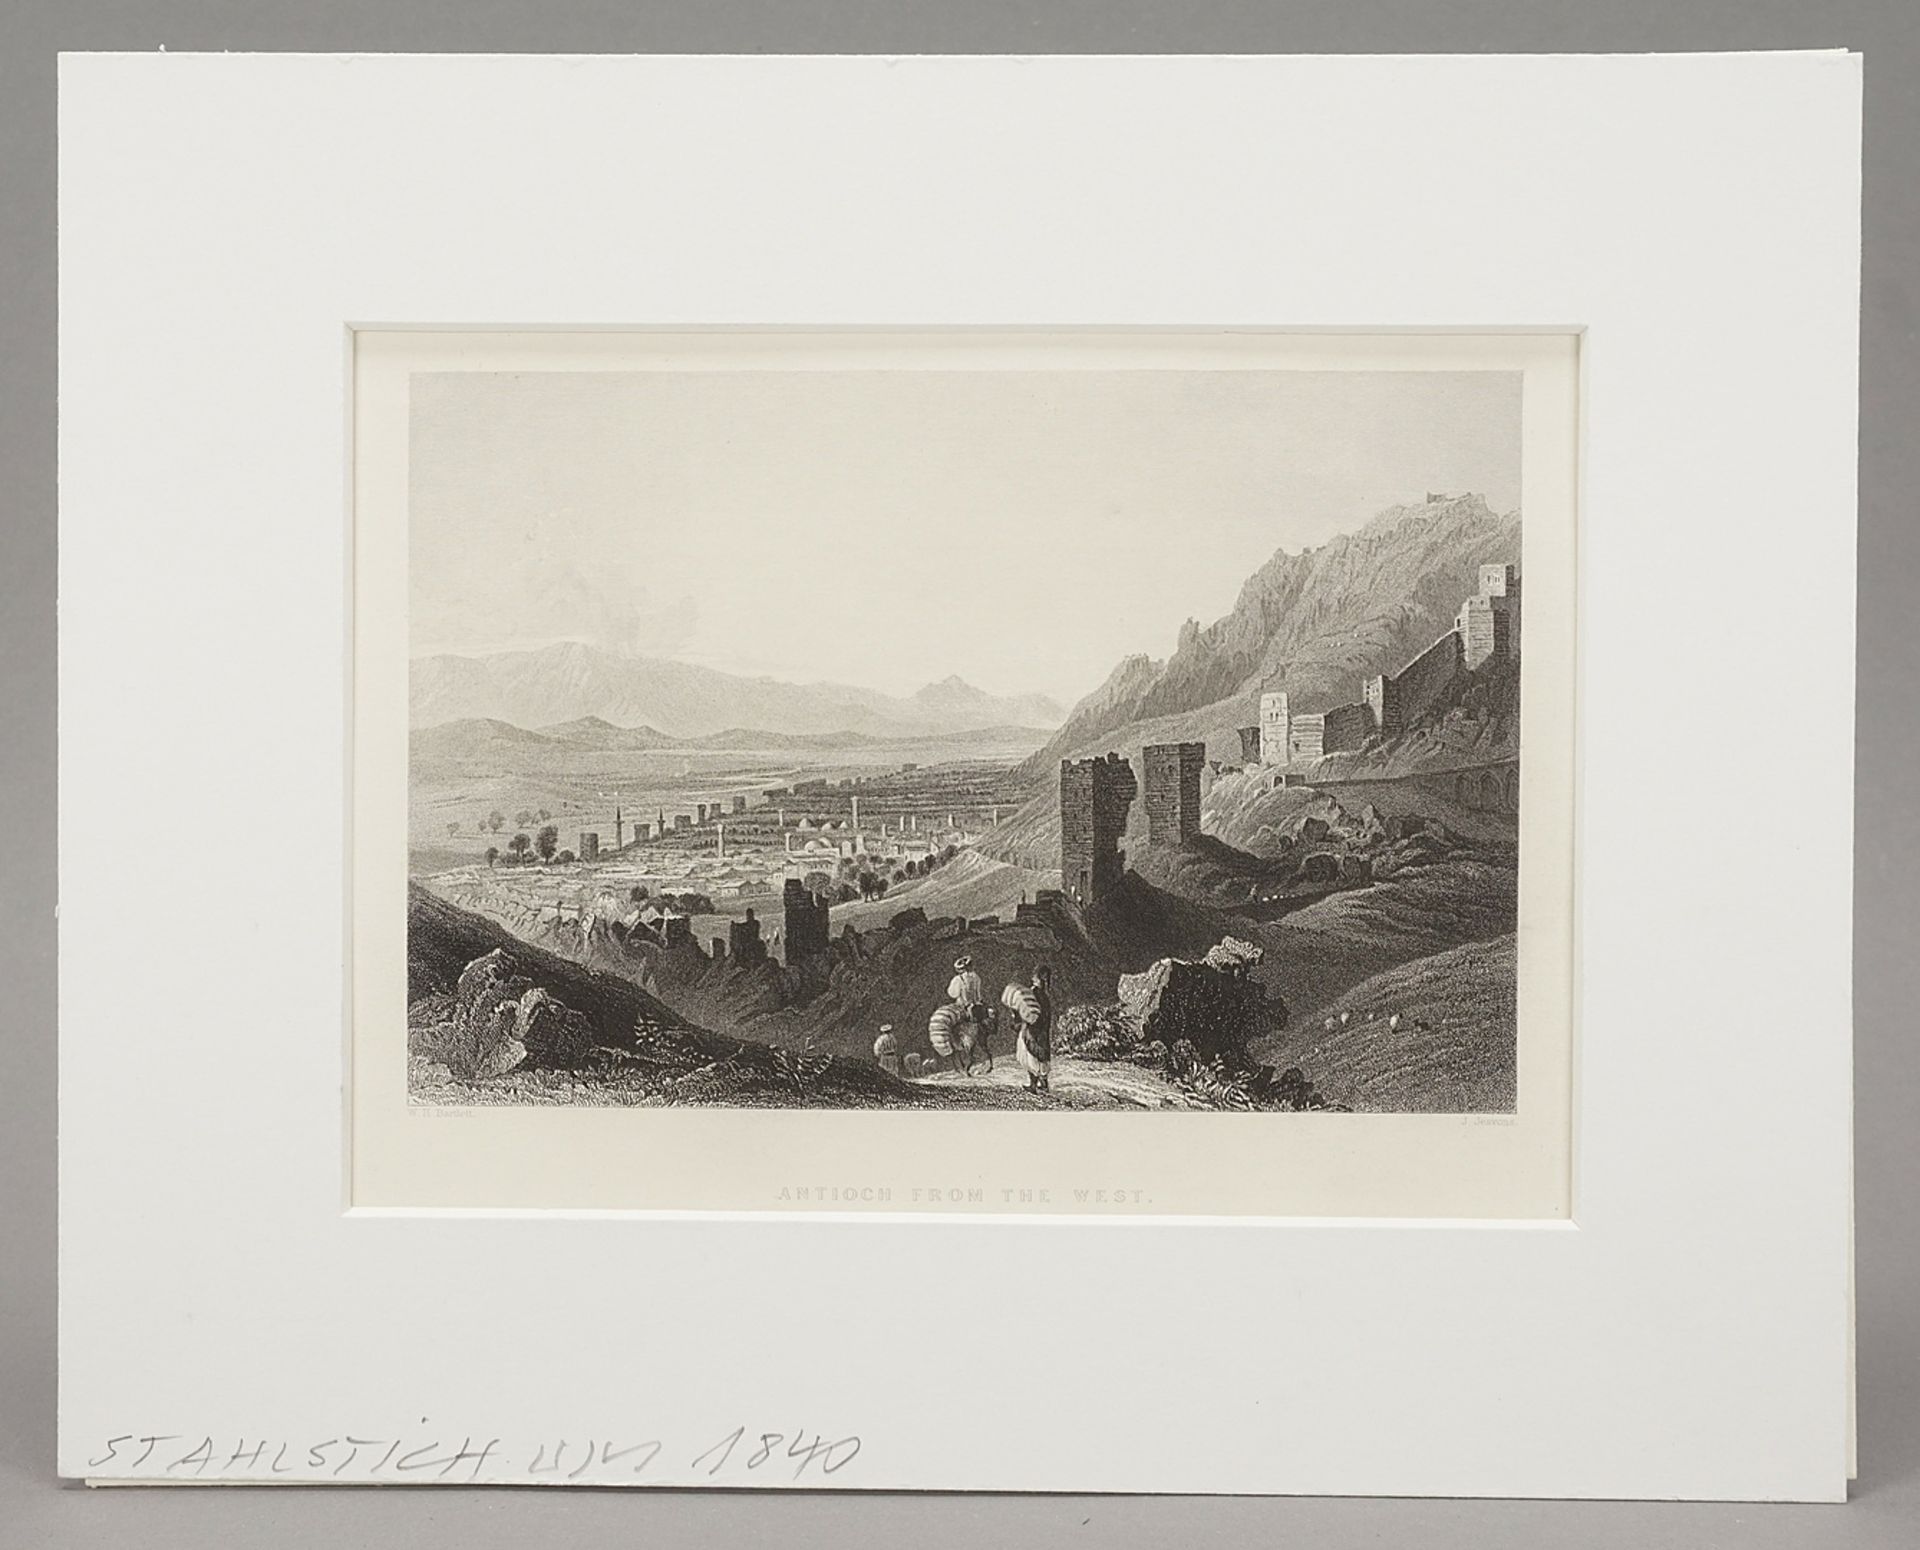 J. Jeavons, "Antioch from the West" - Image 2 of 3